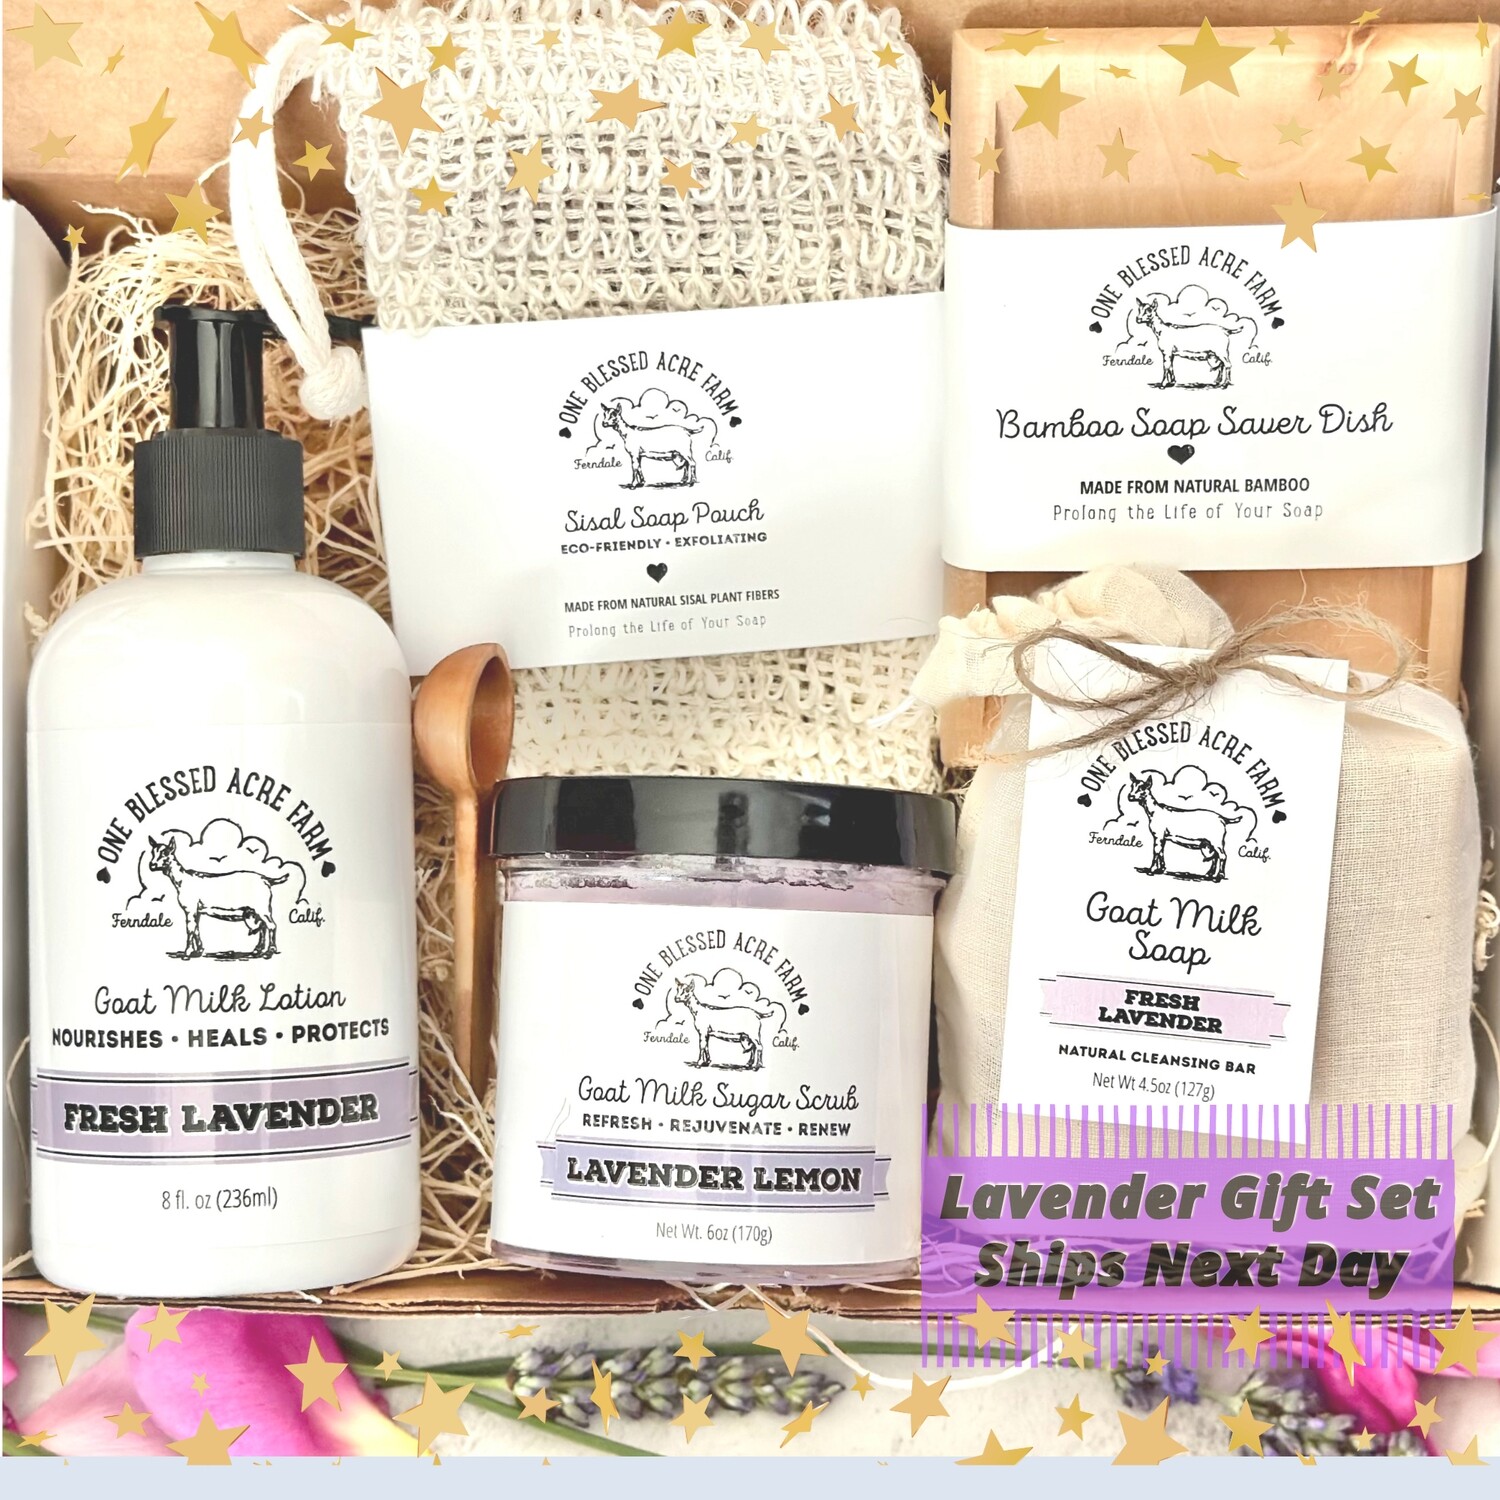 Lavender Gift Set Soap Personalized Lotion Gift Set Lavender Sugar Scrub Gift Set Bath Spa Gift Set Care Package Soap Gift Box Lavender Gift